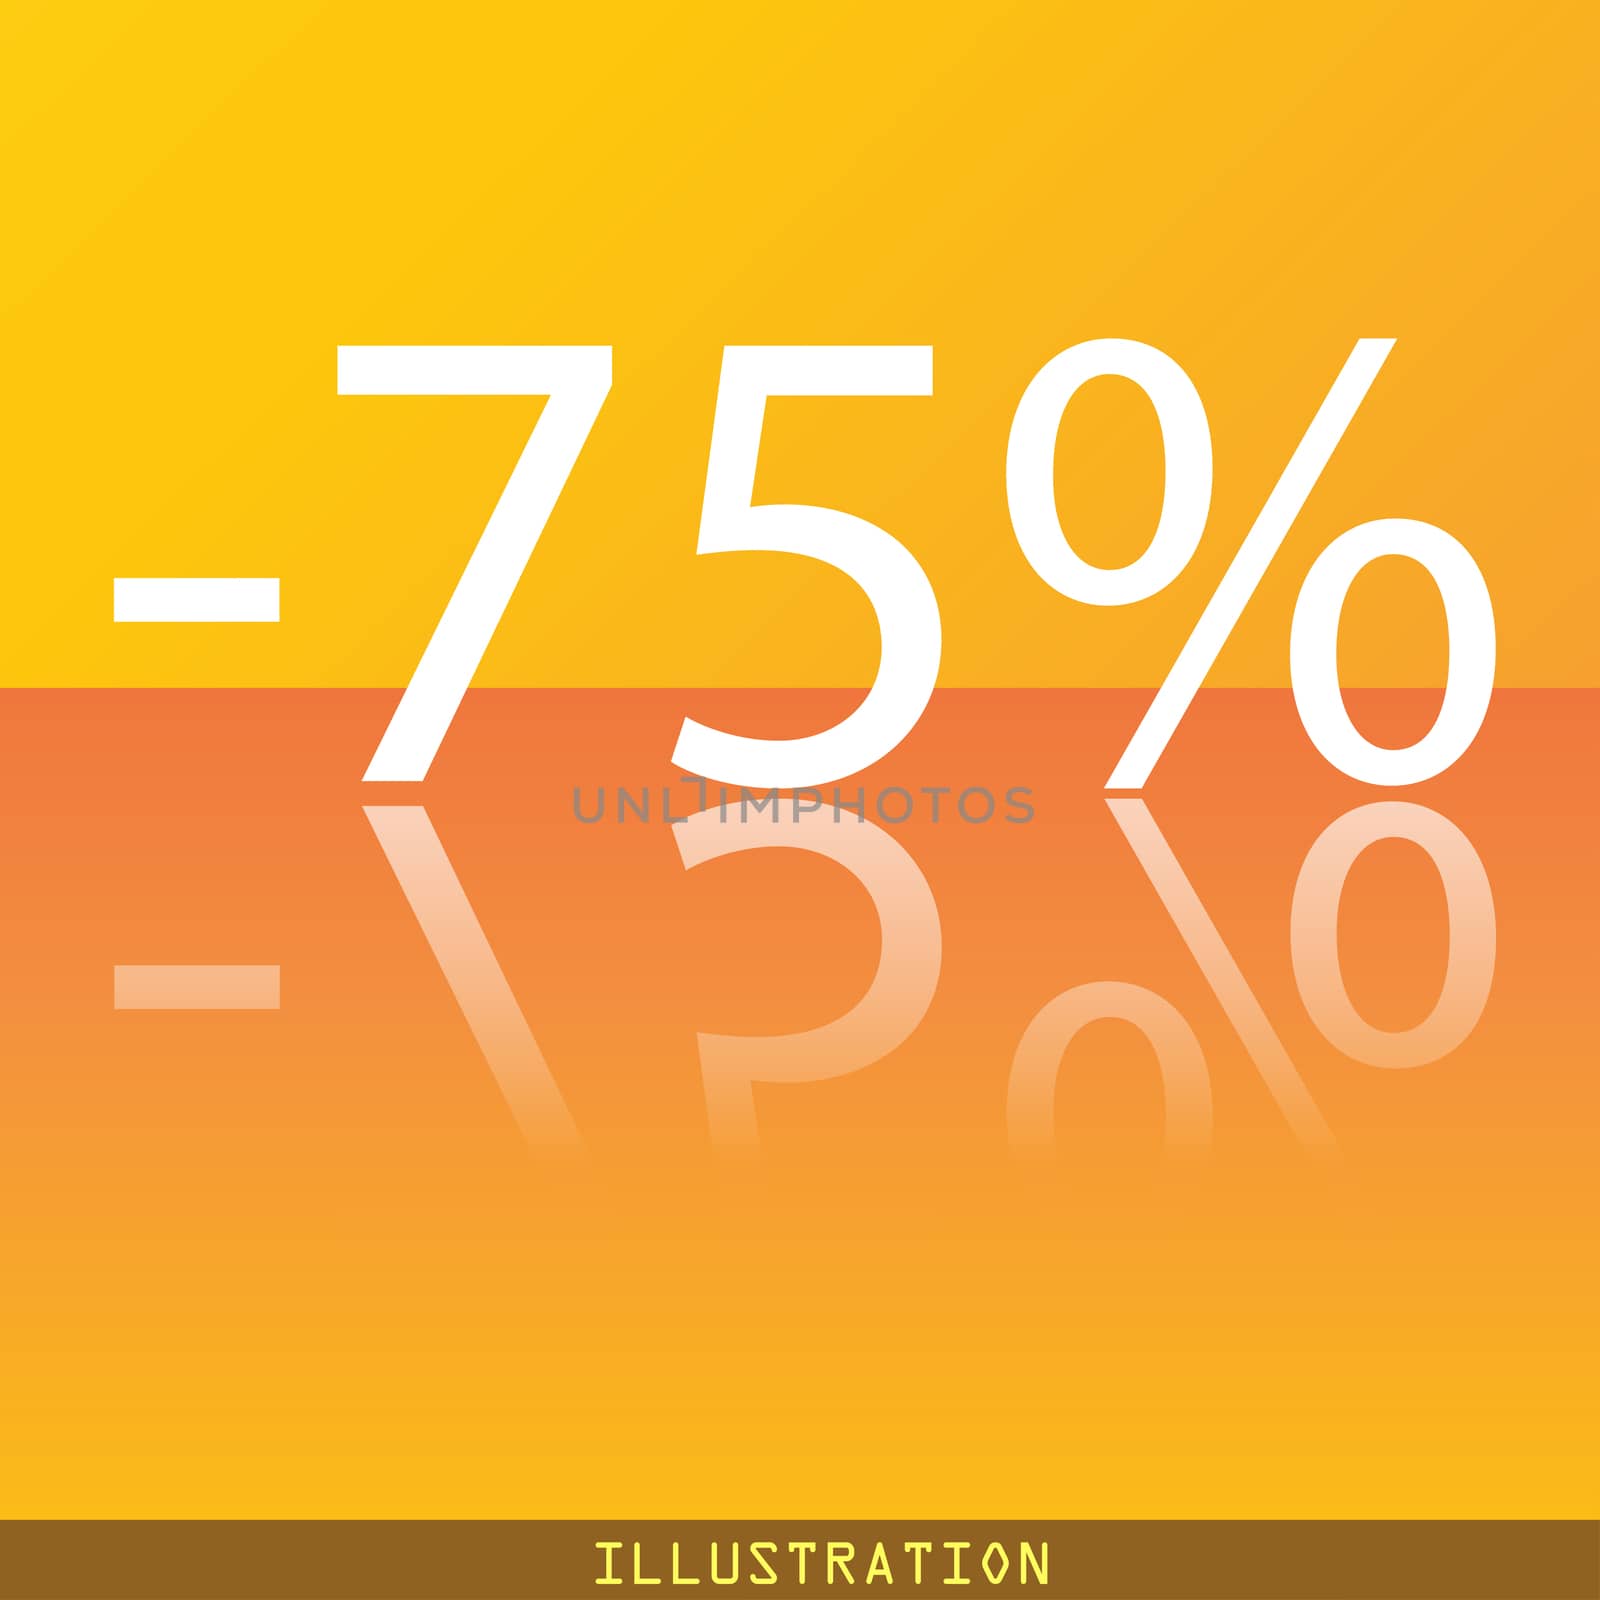 75 percent discount icon symbol Flat modern web design with reflection and space for your text. illustration. Raster version